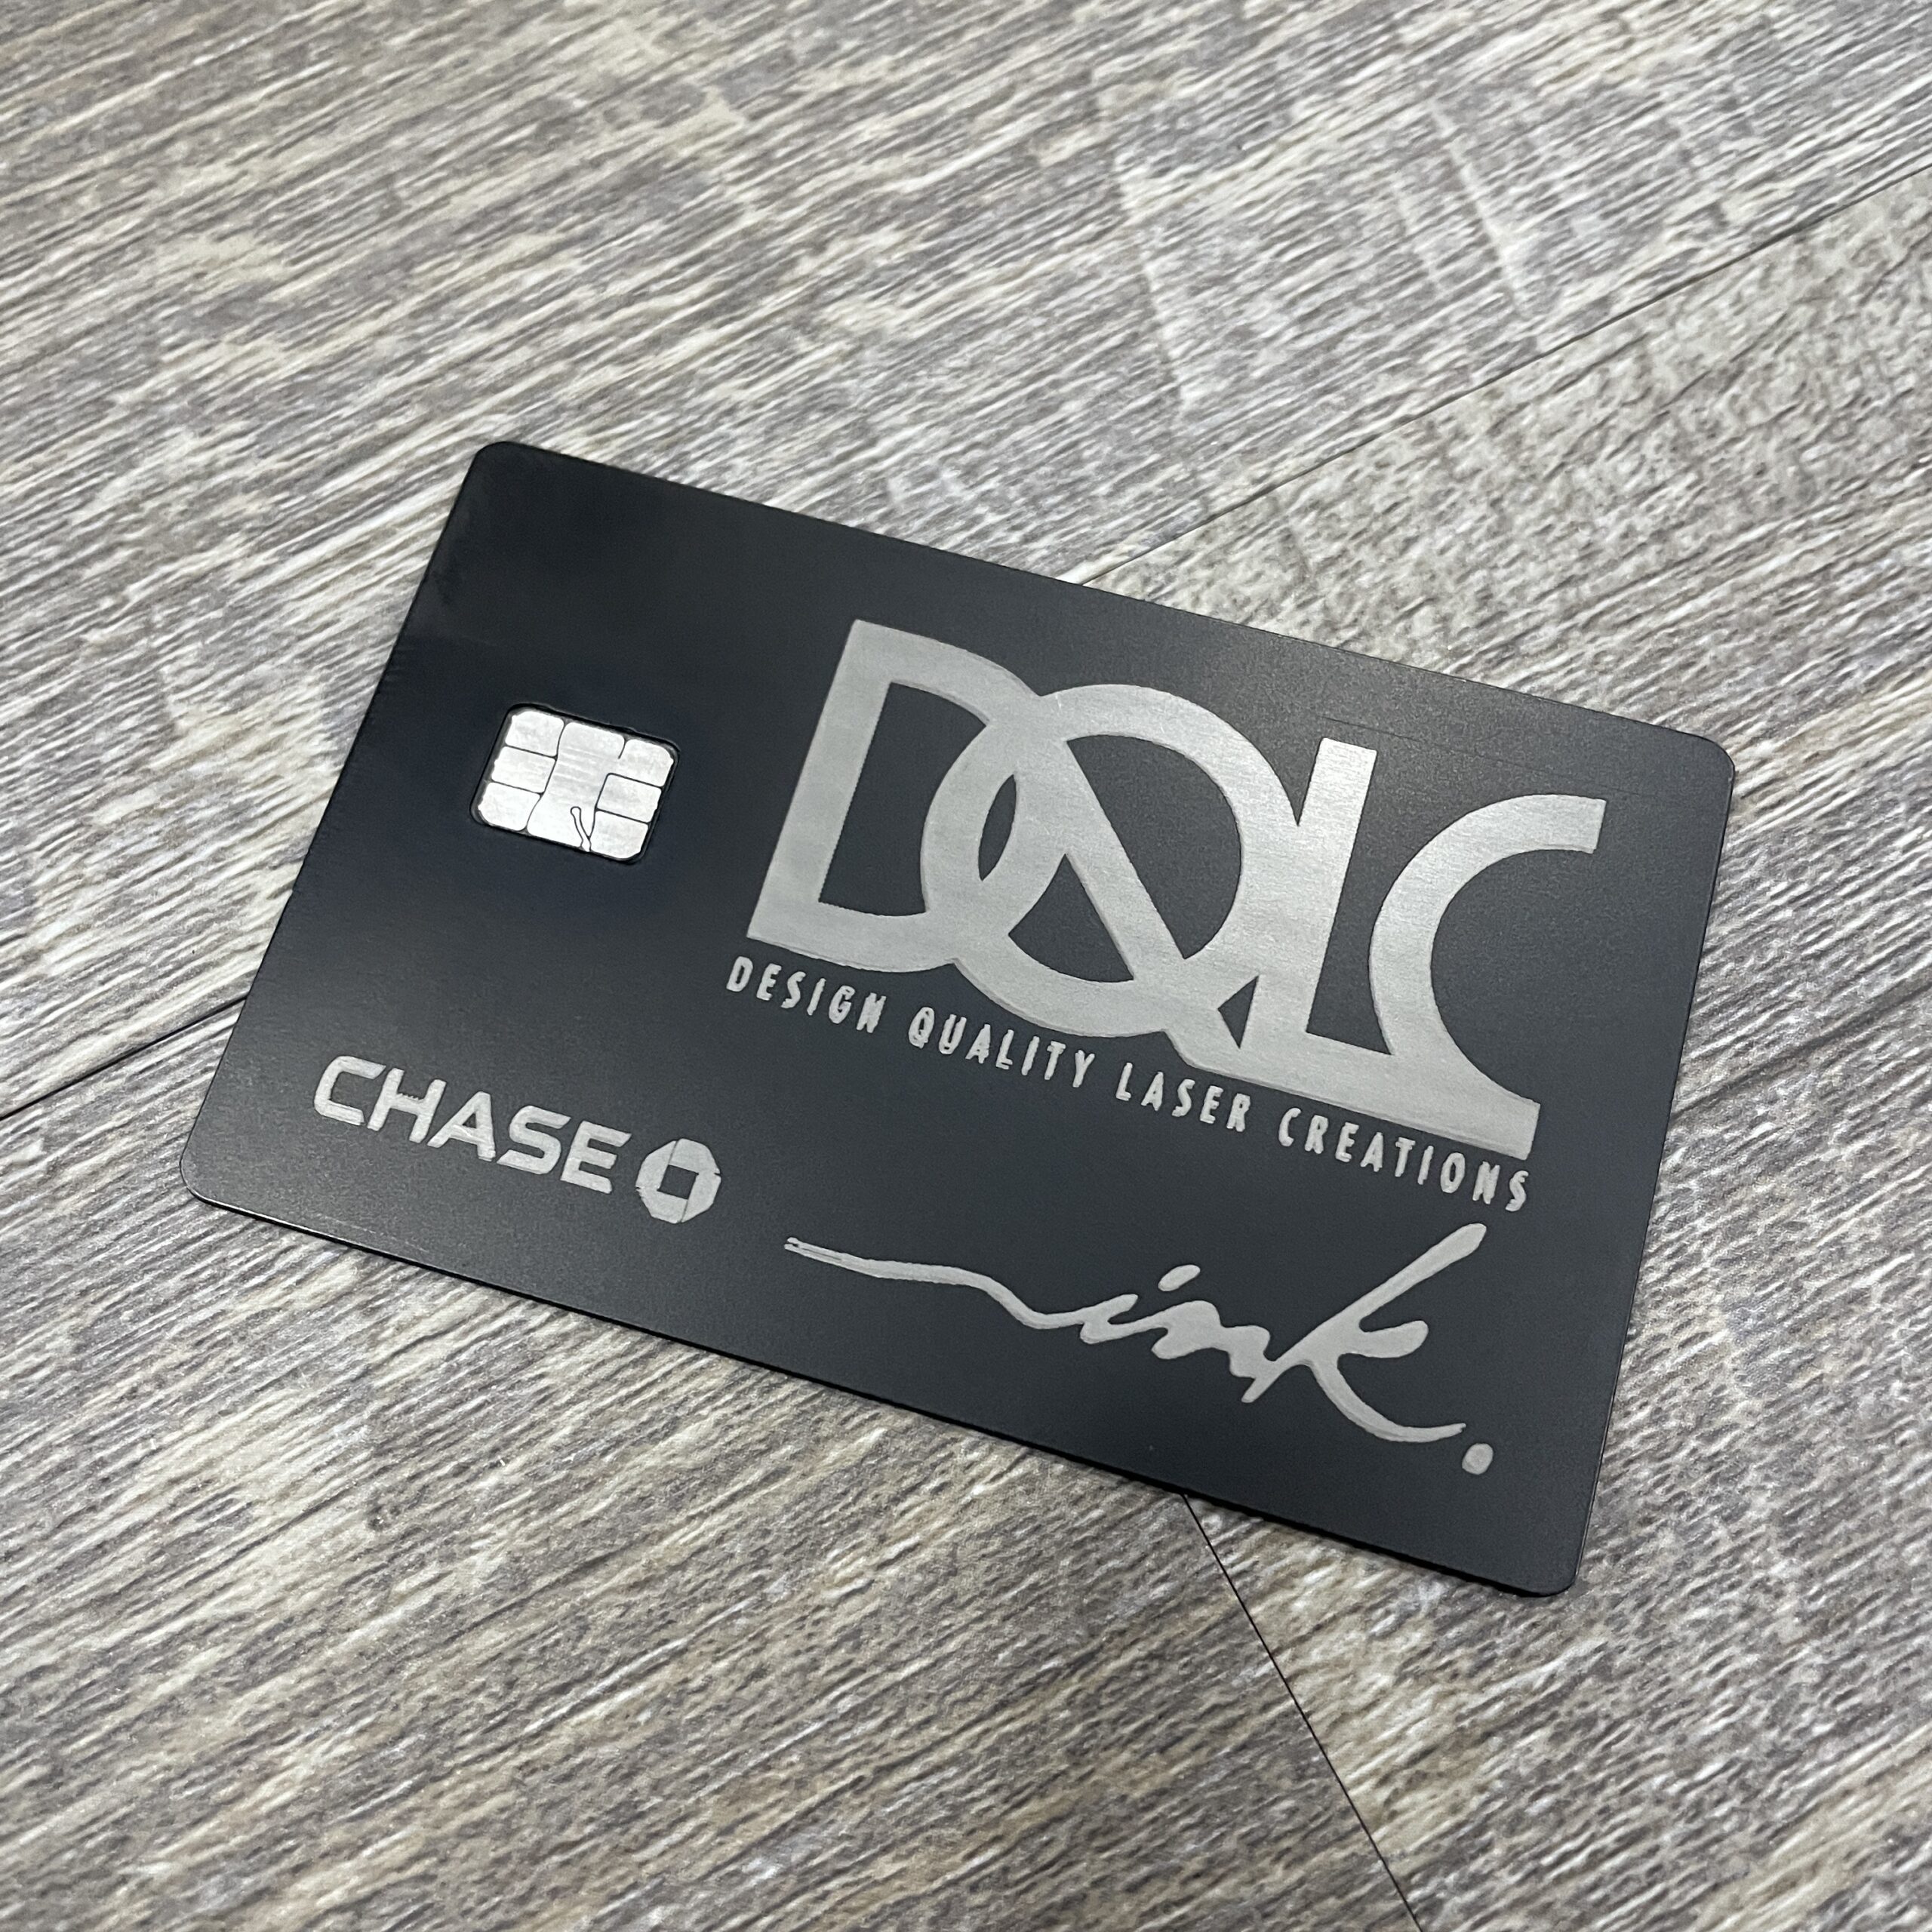 Metal Credit Cards (These are the regular finish cards) - Metal credit cards  - KZ Laser Works - Custom Laser Engraving